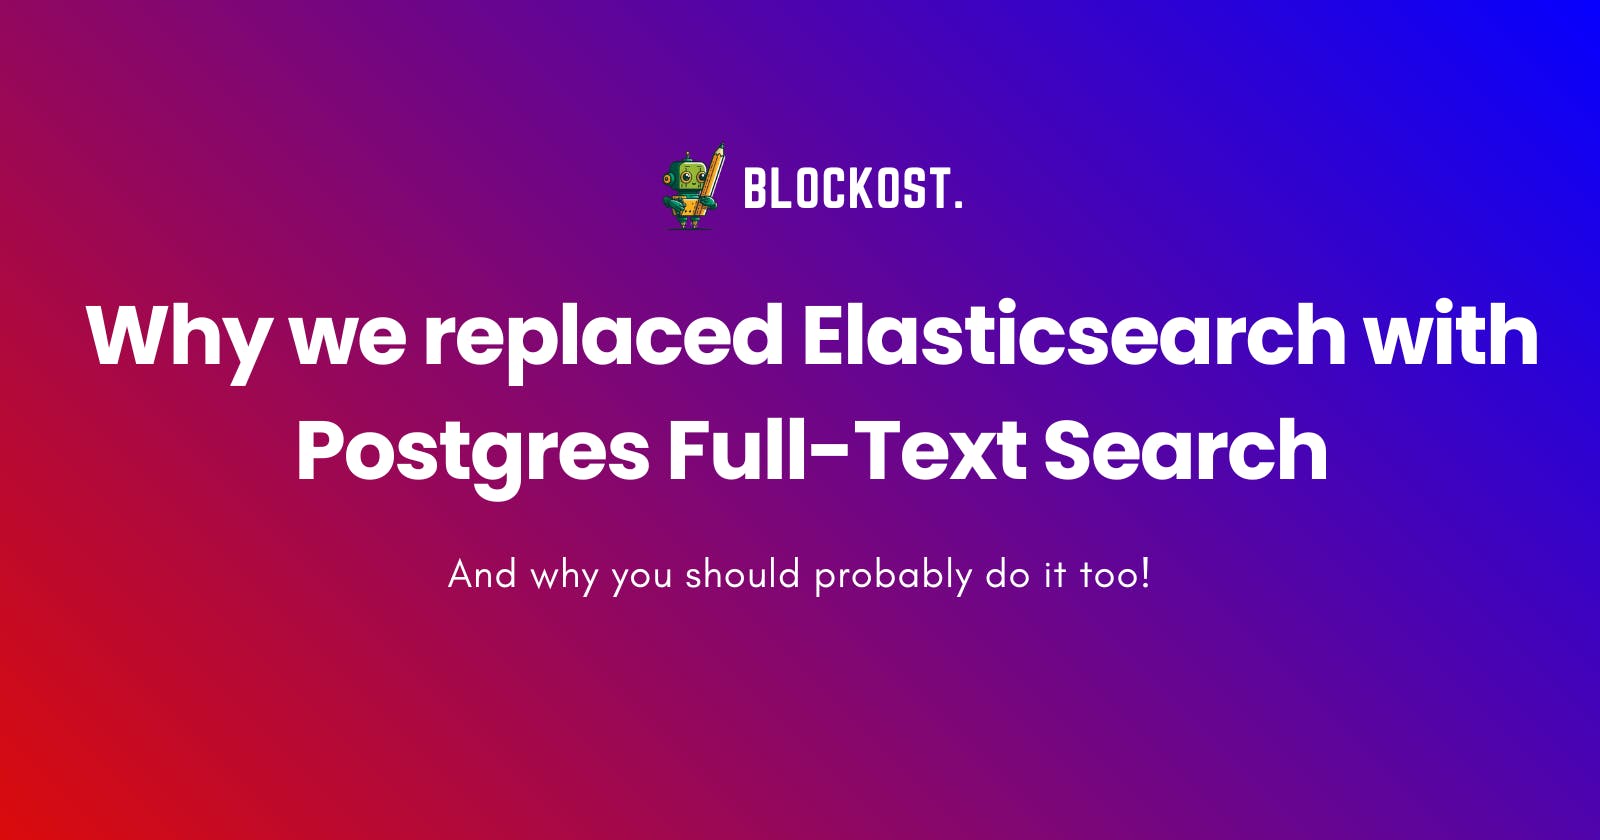 Why we replaced Elasticsearch with Postgres Full-Text Search